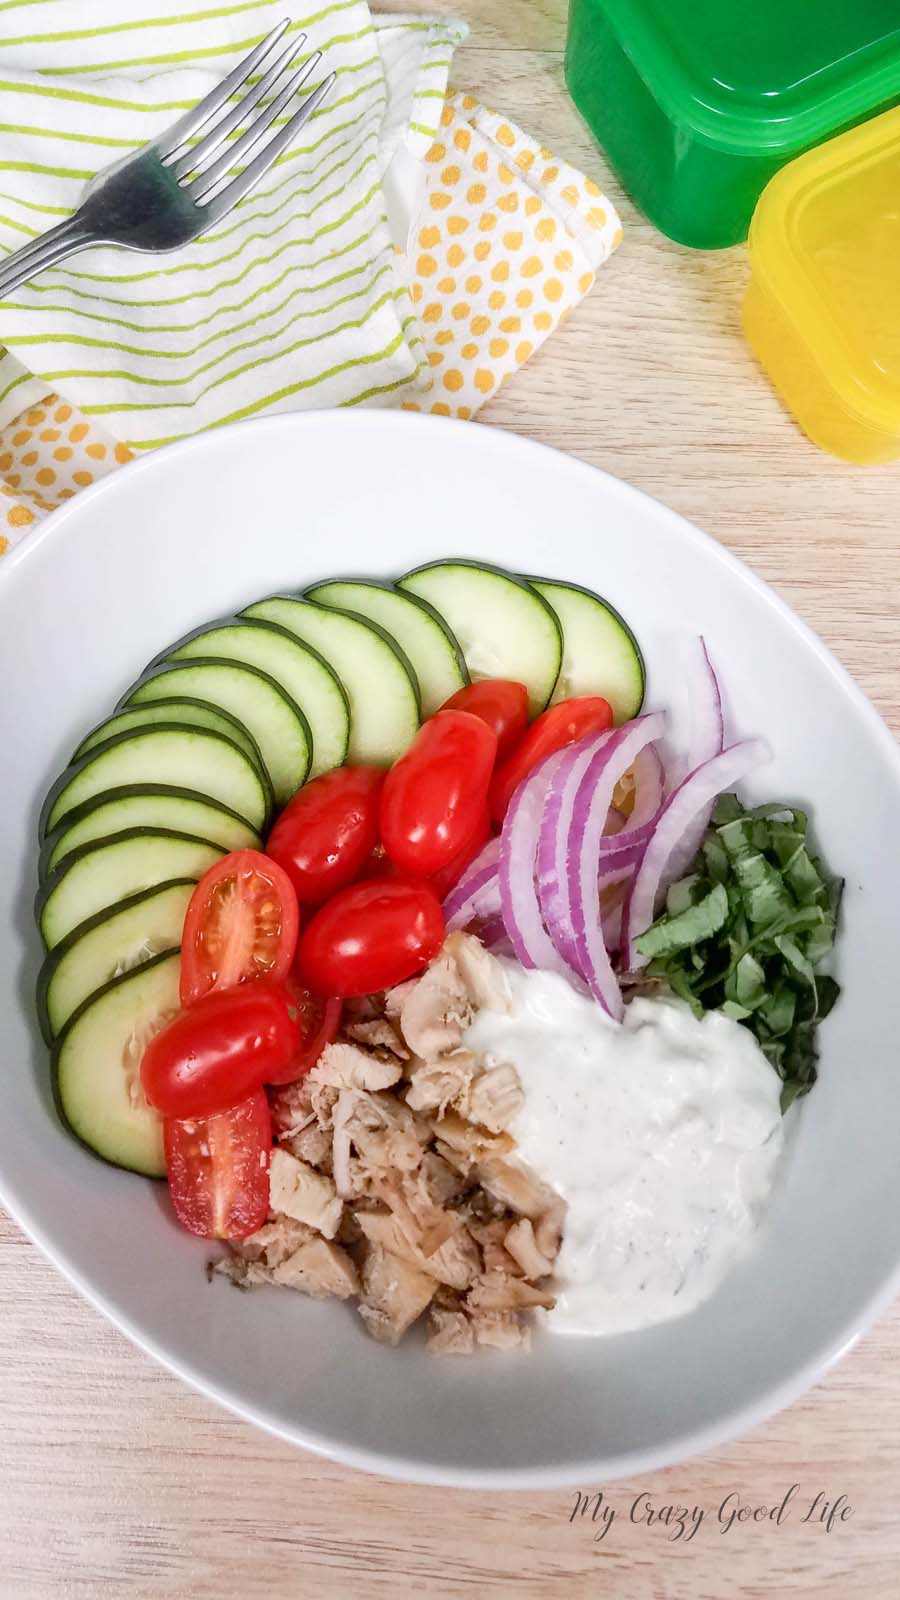 These healthy chicken gyro bowls with homemade tzatziki sauce are the perfect summer family meal! Delicious gyro chicken with fresh vegetables and homemade tzatziki sauce make this meal prep recipe one to save! #veggiesmost #2bmindset #21dayfix #mealprep #beachbody #dinnerrecipe #gyrobowl #healthydinner